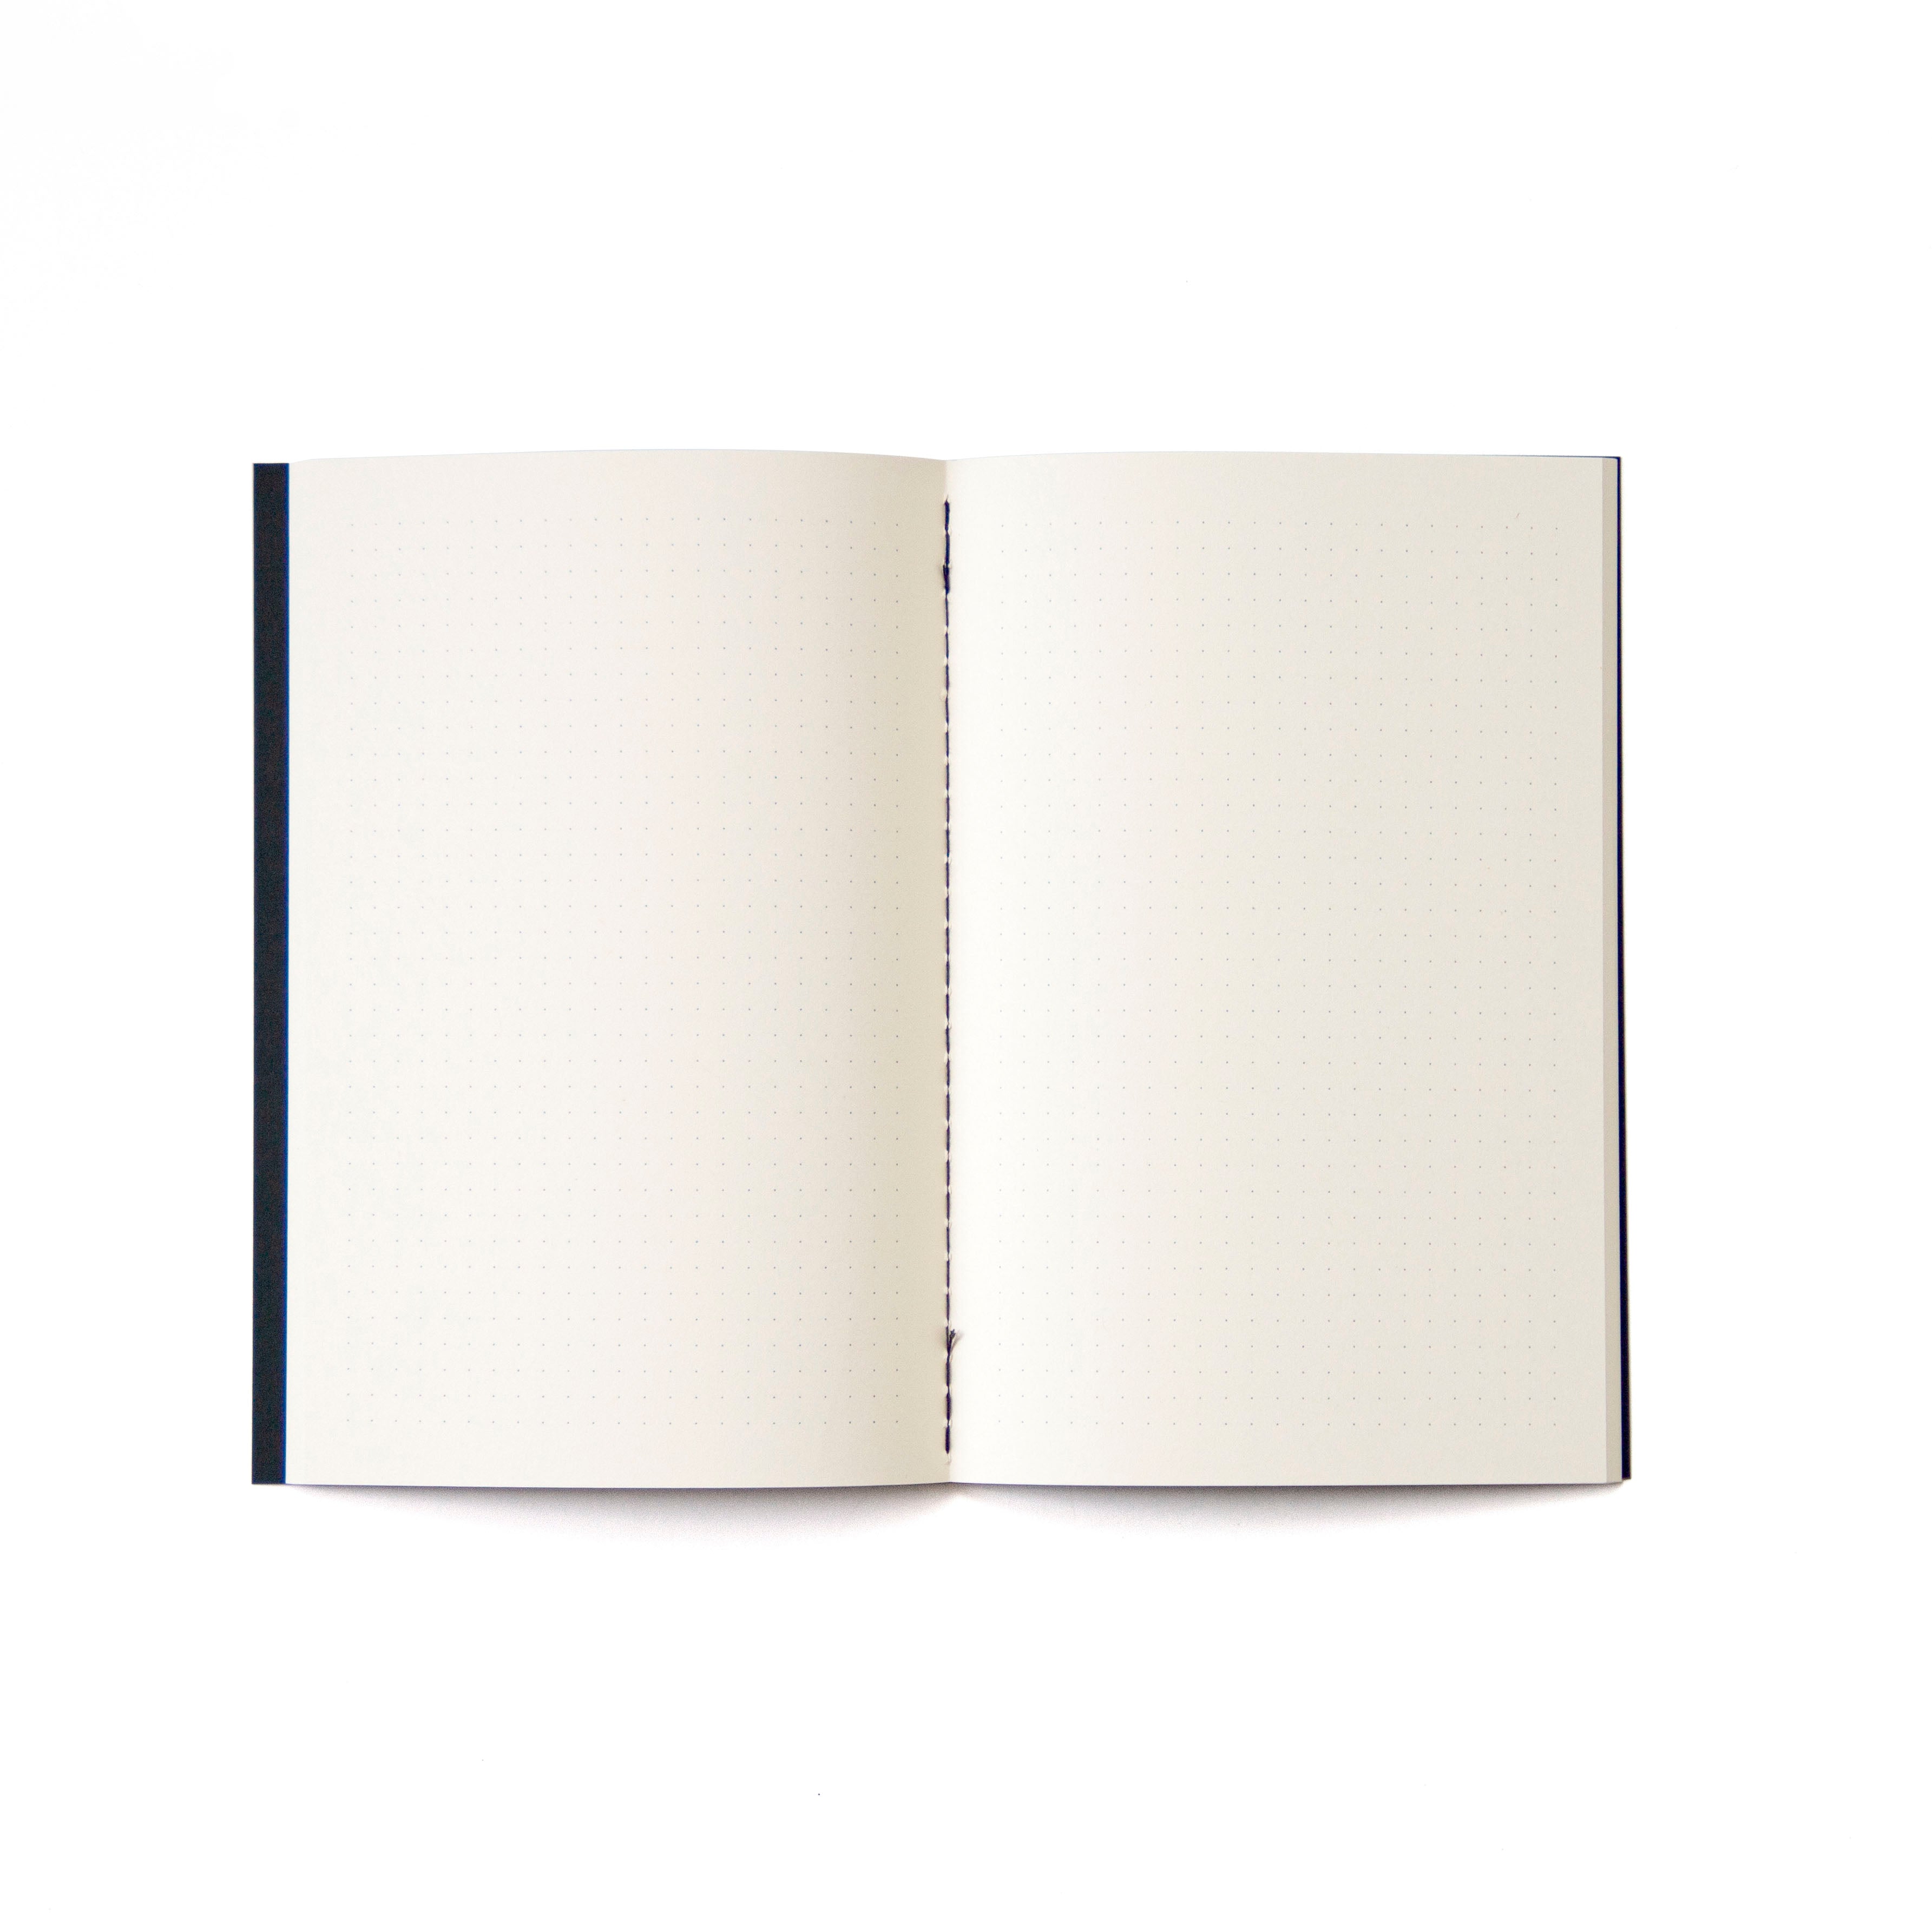 Open "Random thoughts" dotted notebook. Binding with black thread.